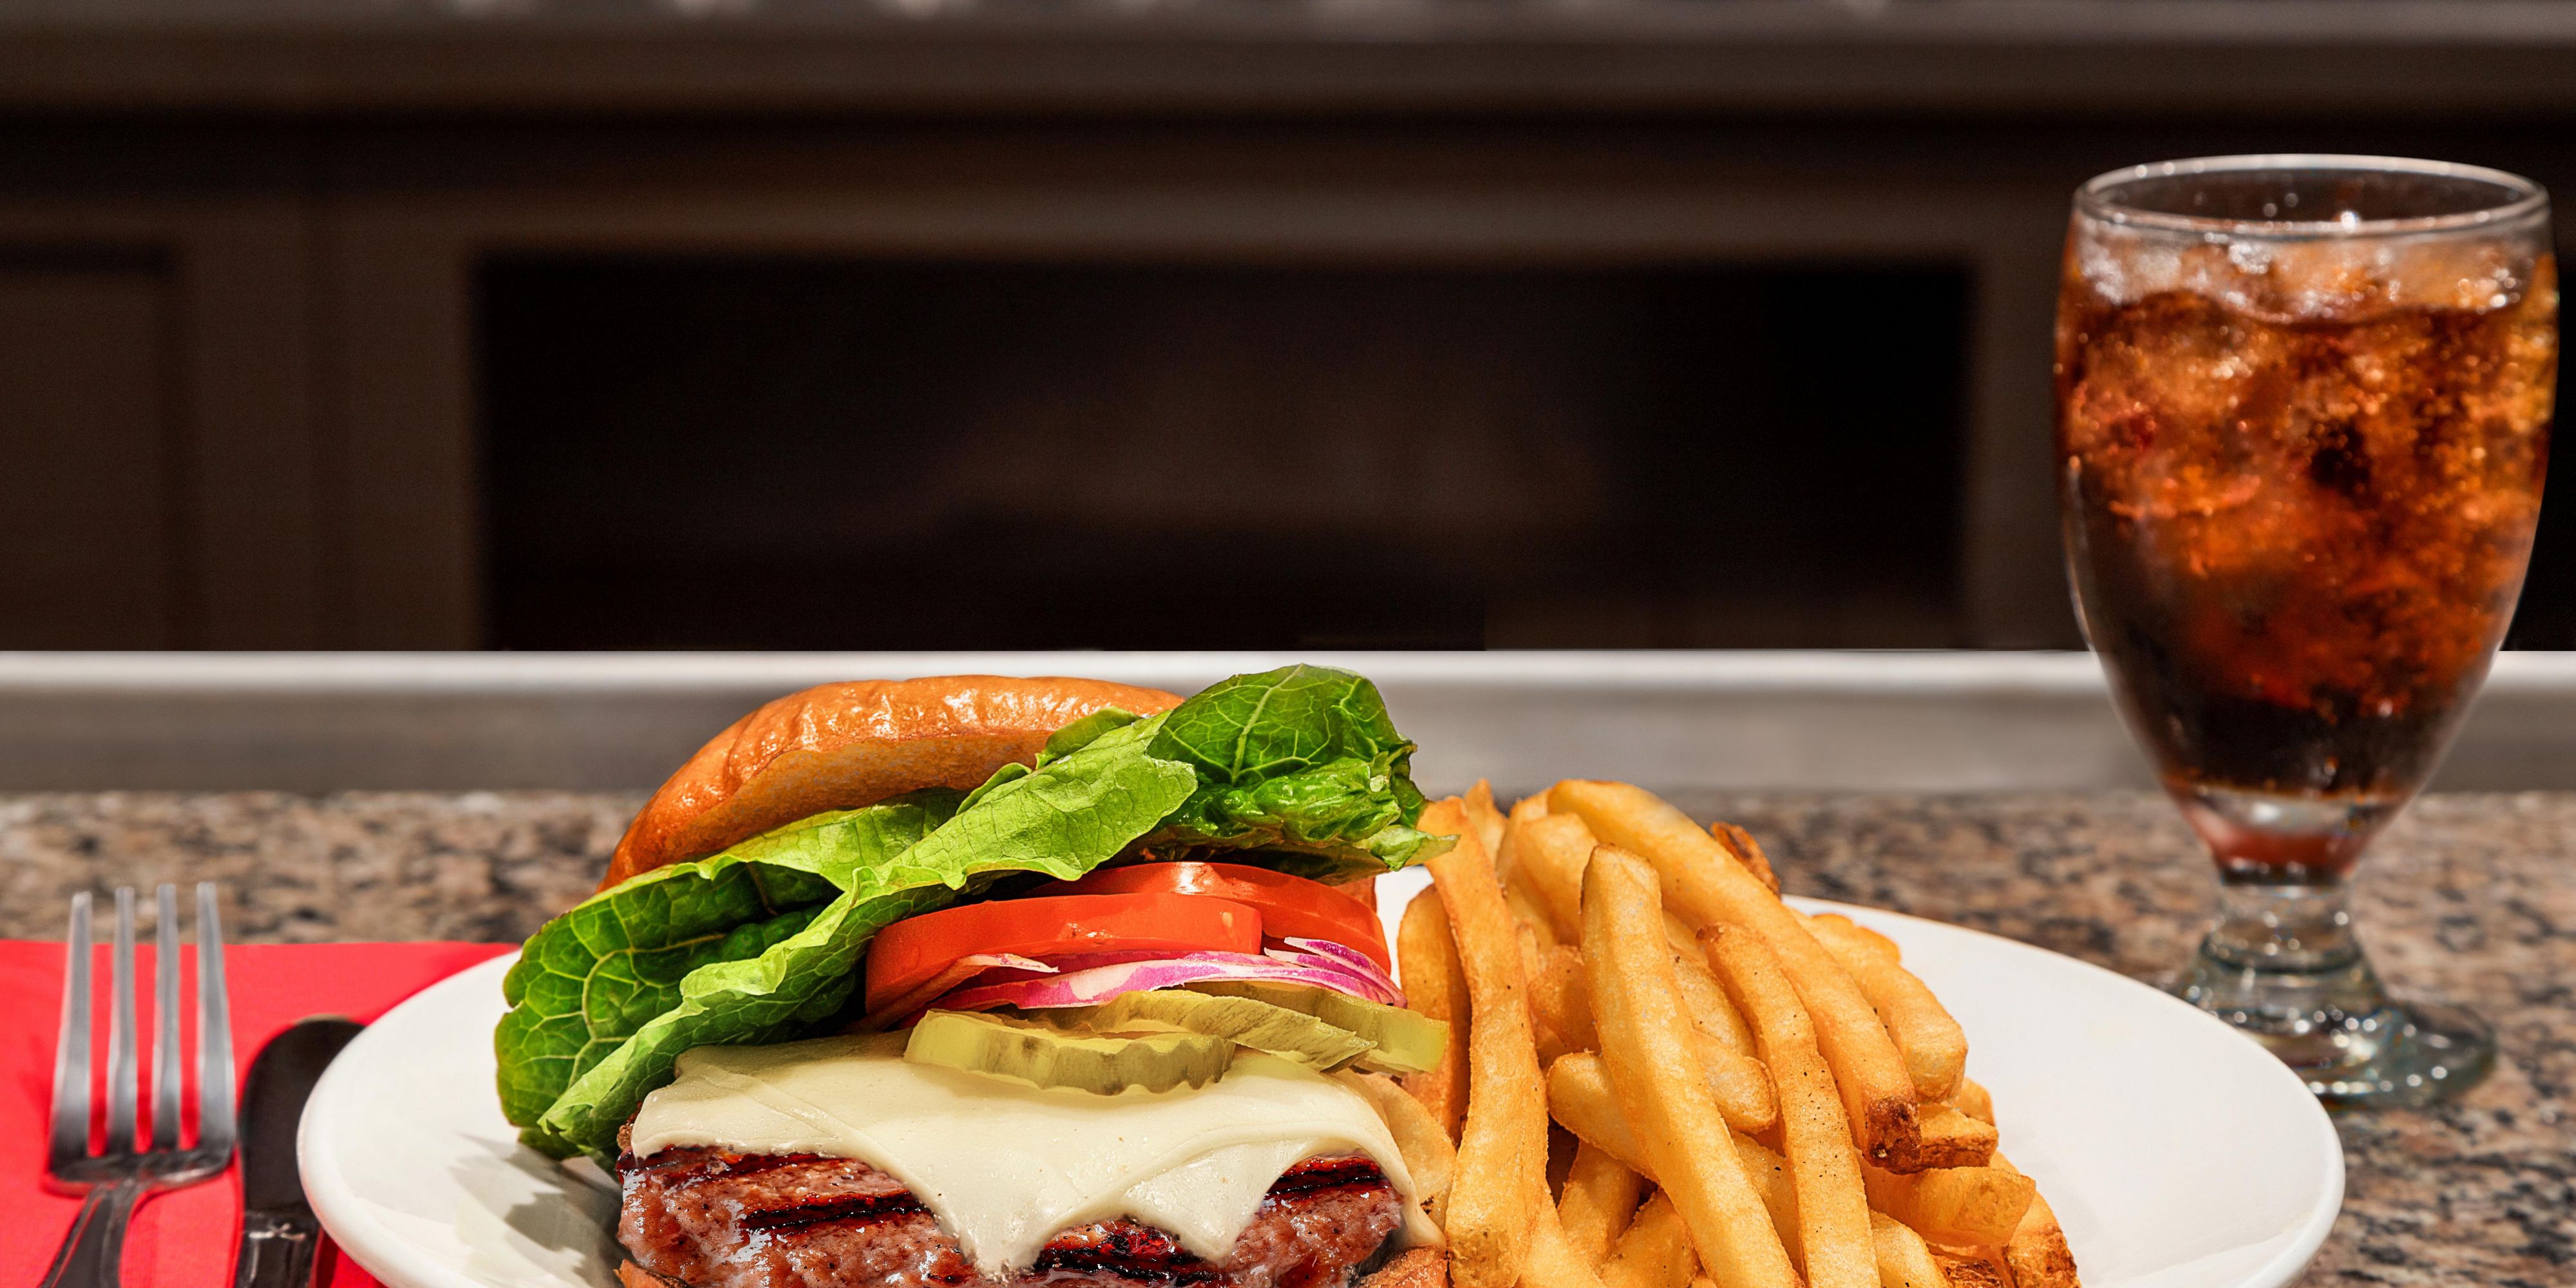 Order the juicy Cheeseburger in our restaurant, DRAFT.